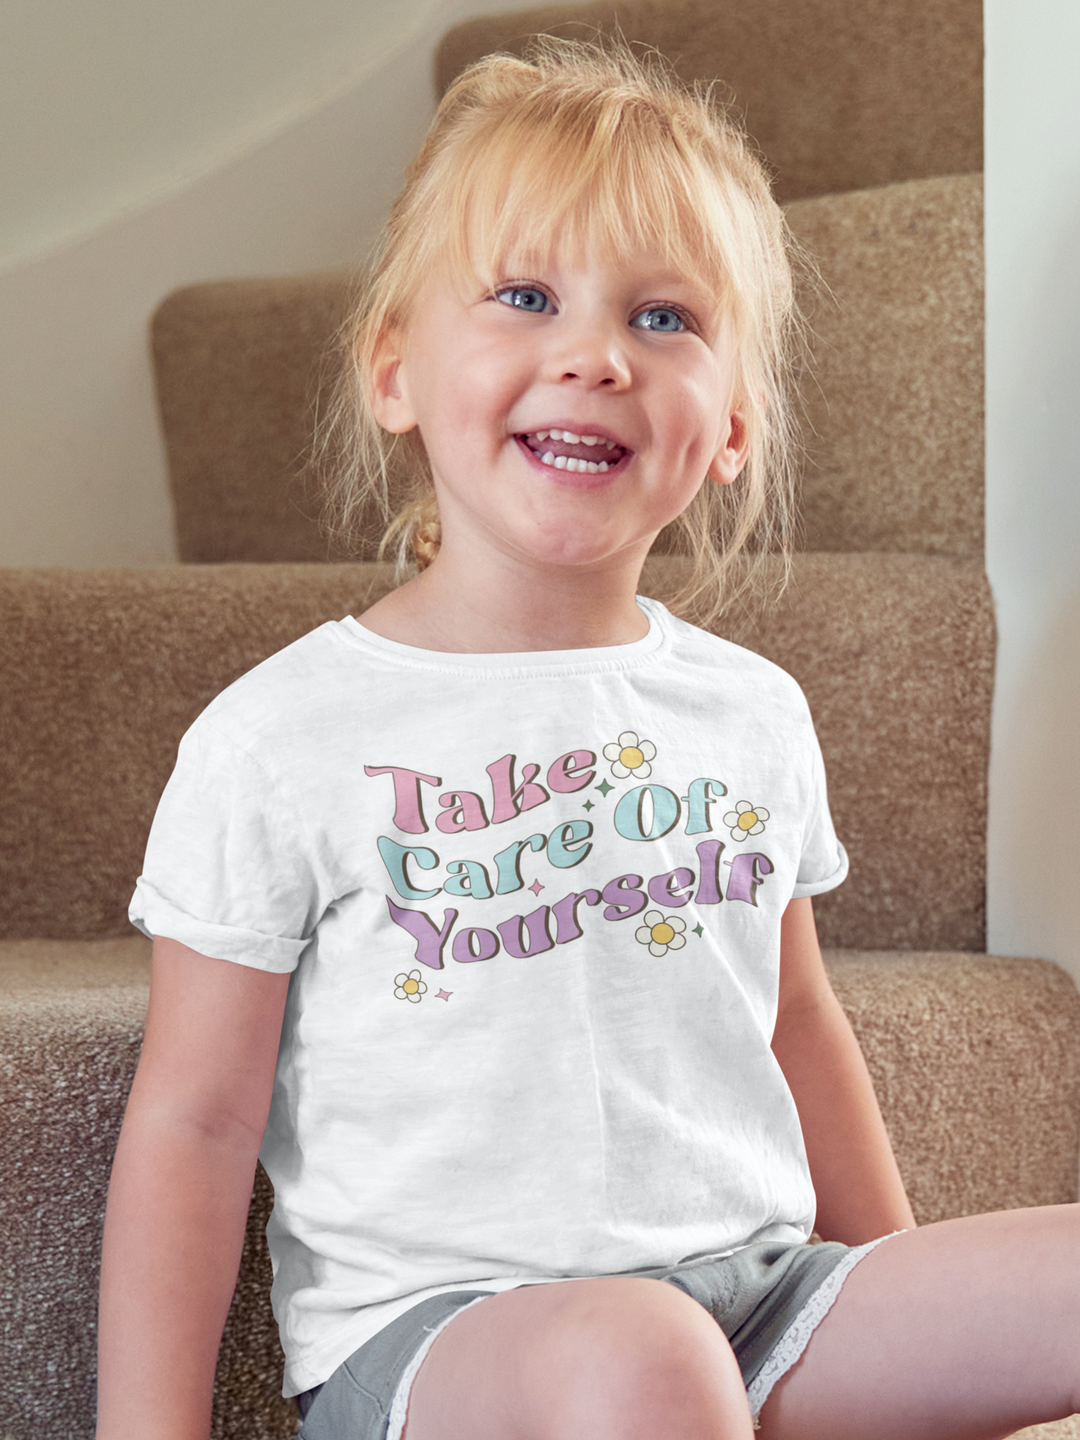 Take Care Of Yourself. Short Sleeve T Shirt For Toddler And Kids. - TeesForToddlersandKids -  t-shirt - positive - take-care-of-yourself-short-sleeve-t-shirt-for-toddler-and-kids